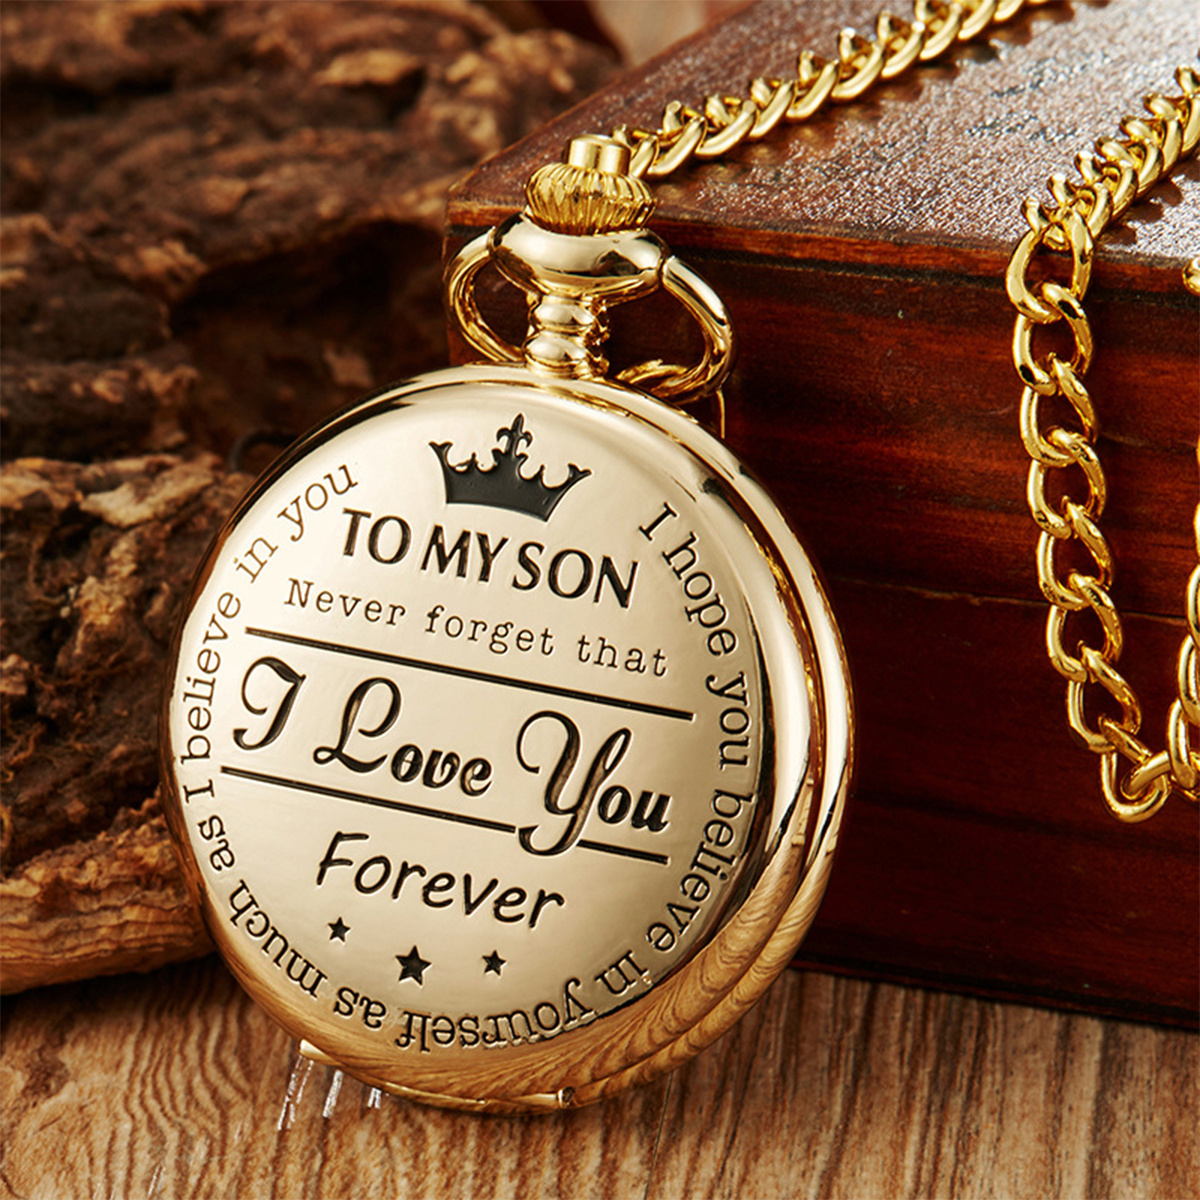 

Engraved Pocket Watch To Son I Love You Gifts From A Mom Dad Birthday Gift Fob Watches Chains